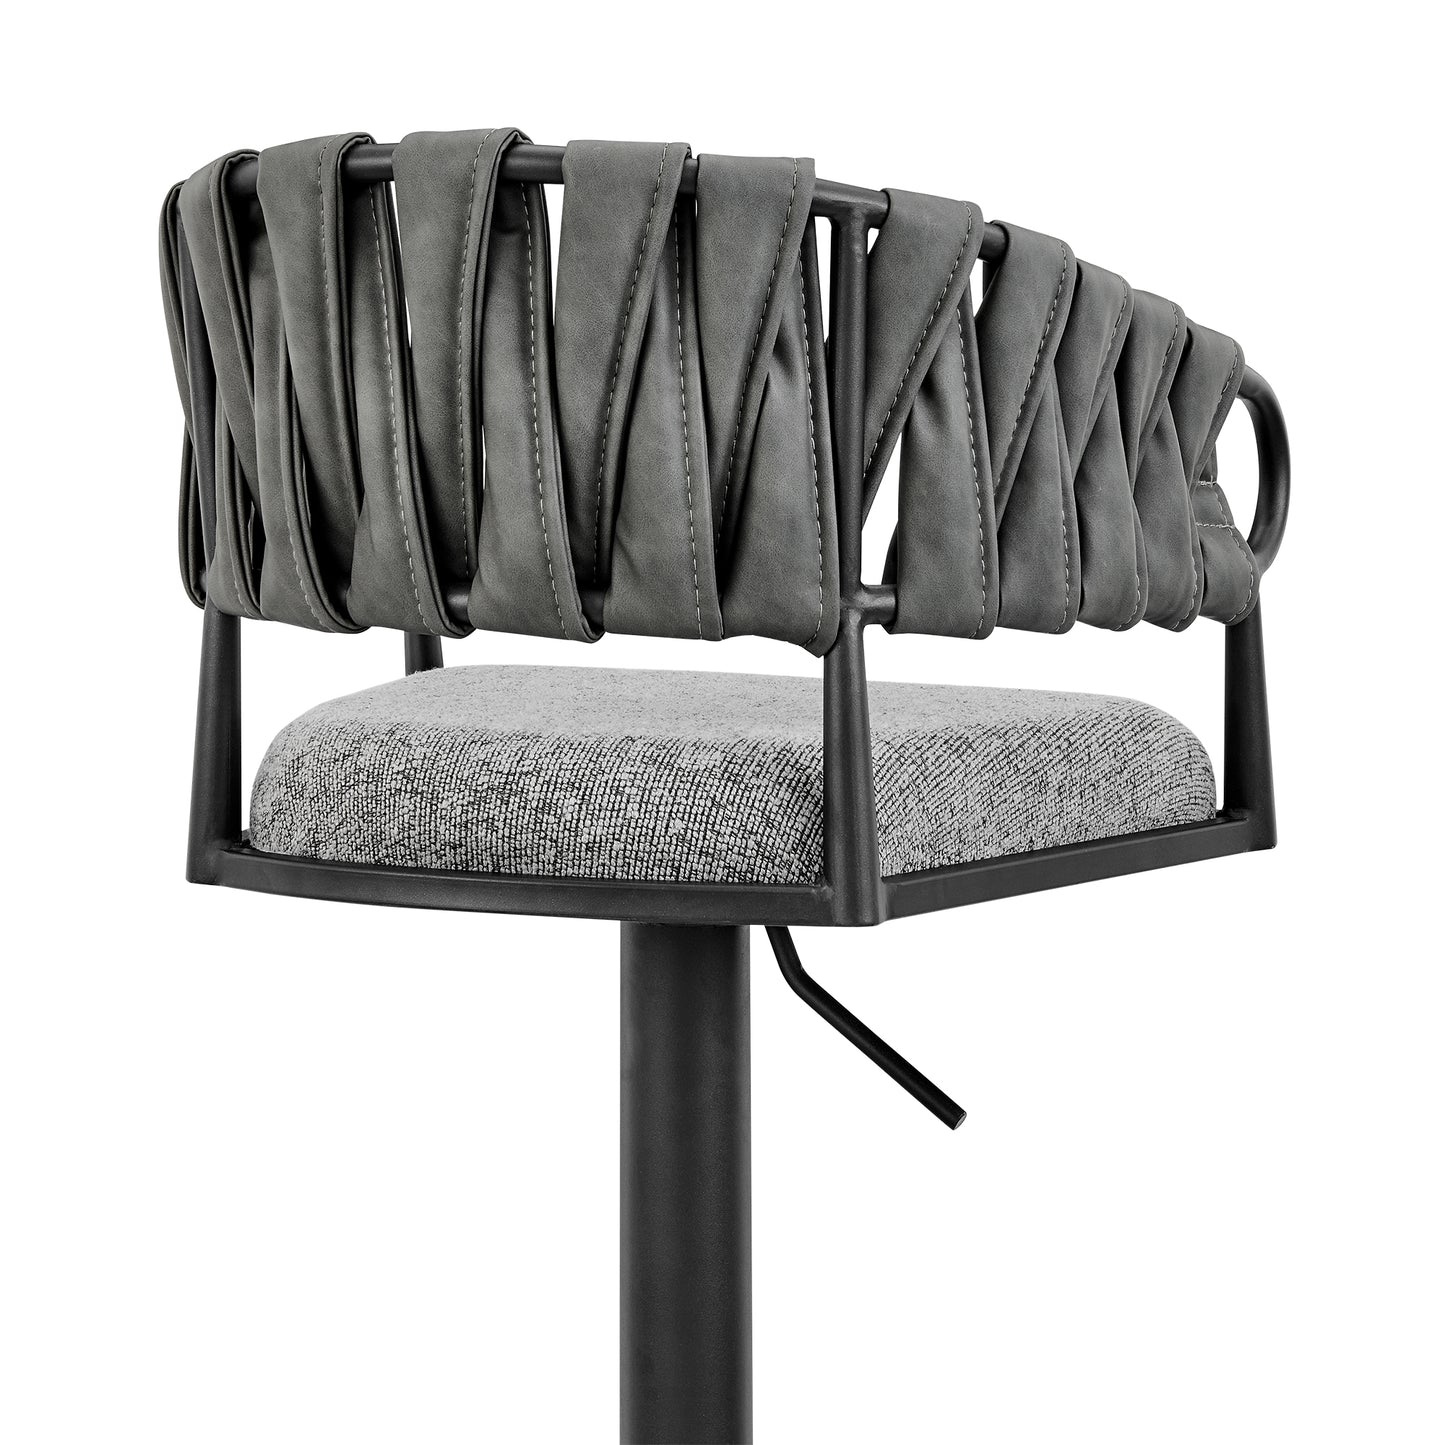 Blaise Adjustable Swivel Counter or Bar Stool in Black Metal with Gray Fabric and Faux Leather